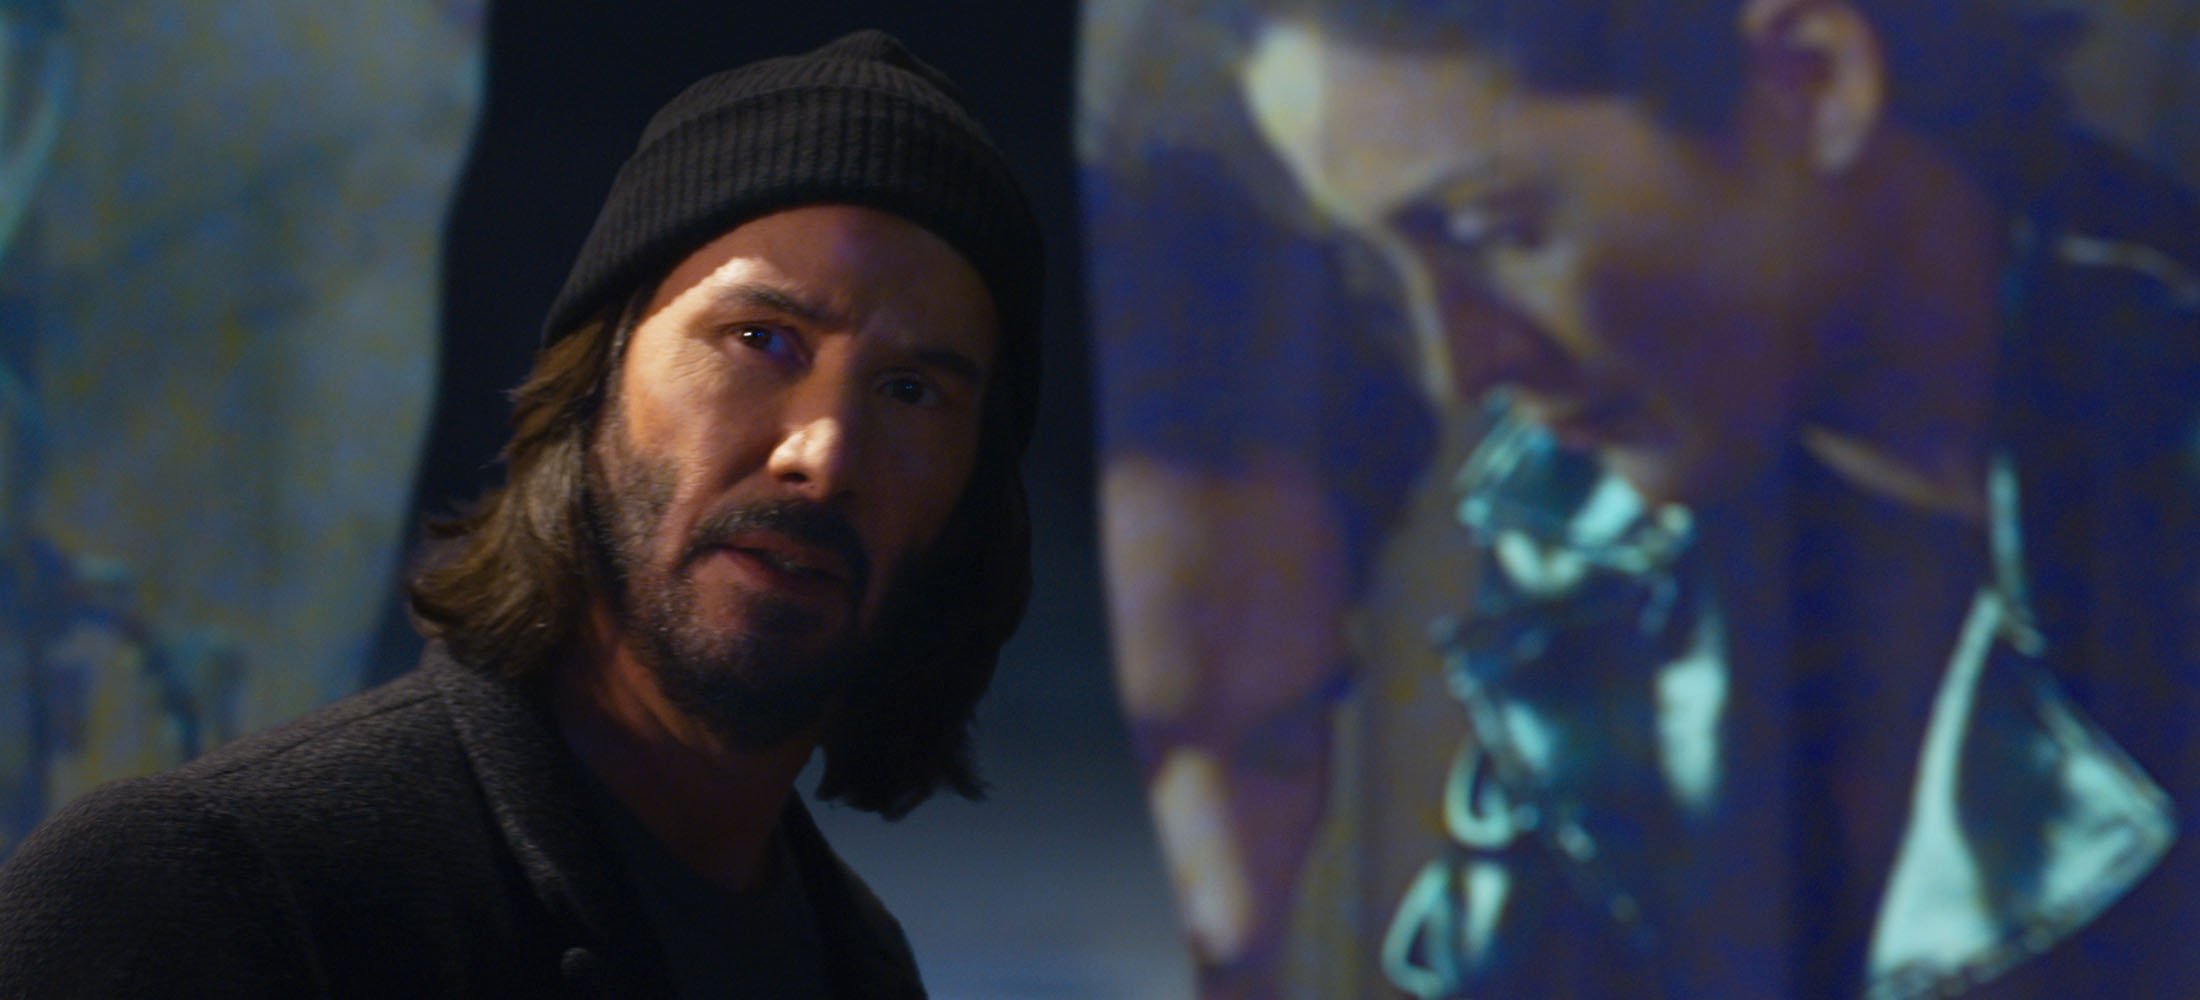 Keanu Reeves, in a scene from the film 